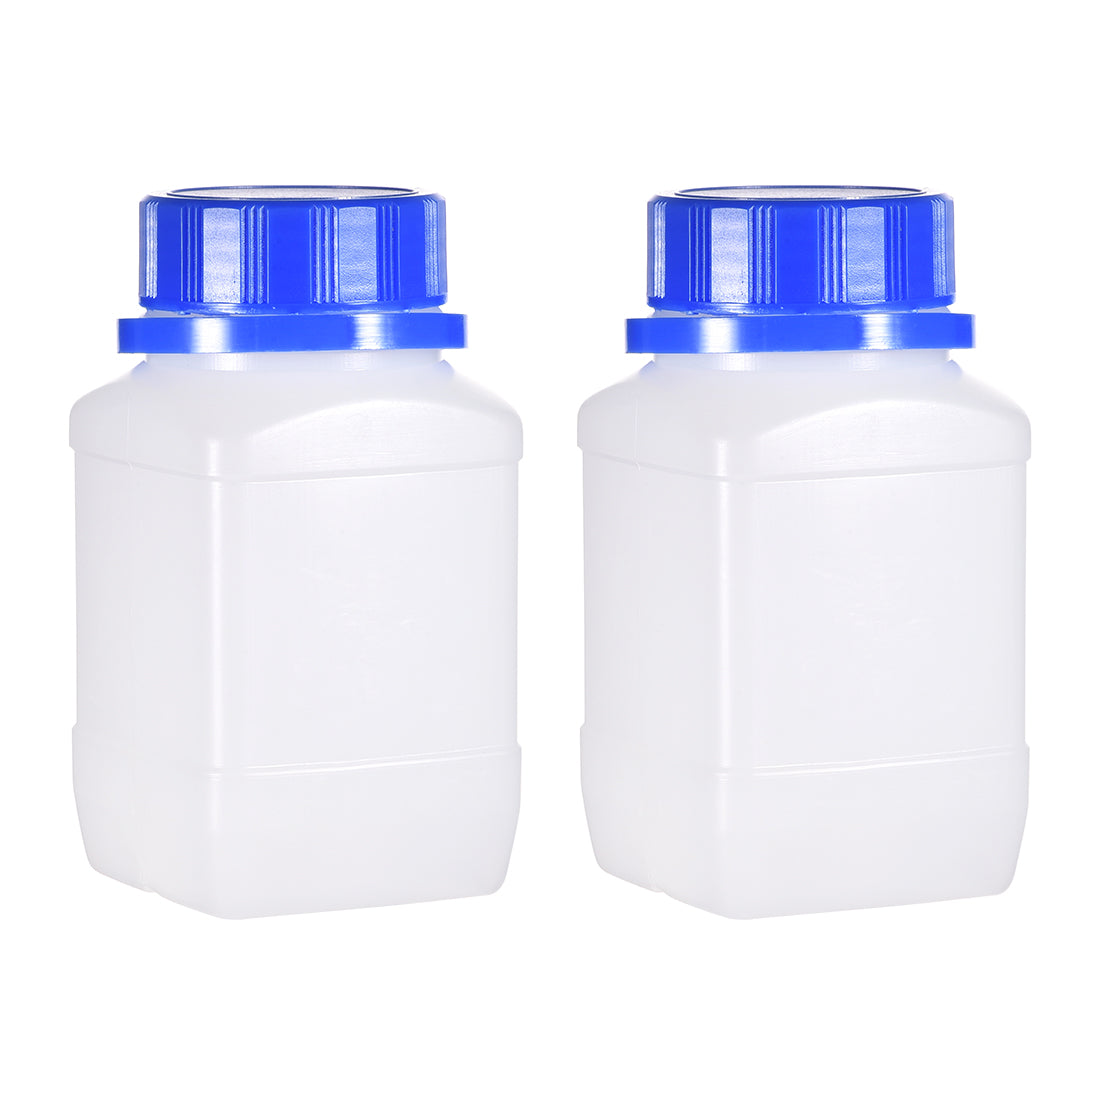 uxcell Uxcell Plastic Lab Chemical Reagent Bottle, 250ml/ 8.45 oz Wide Mouth Sample Sealing Liquid/Solid Storage Bottles, Blue 2pcs